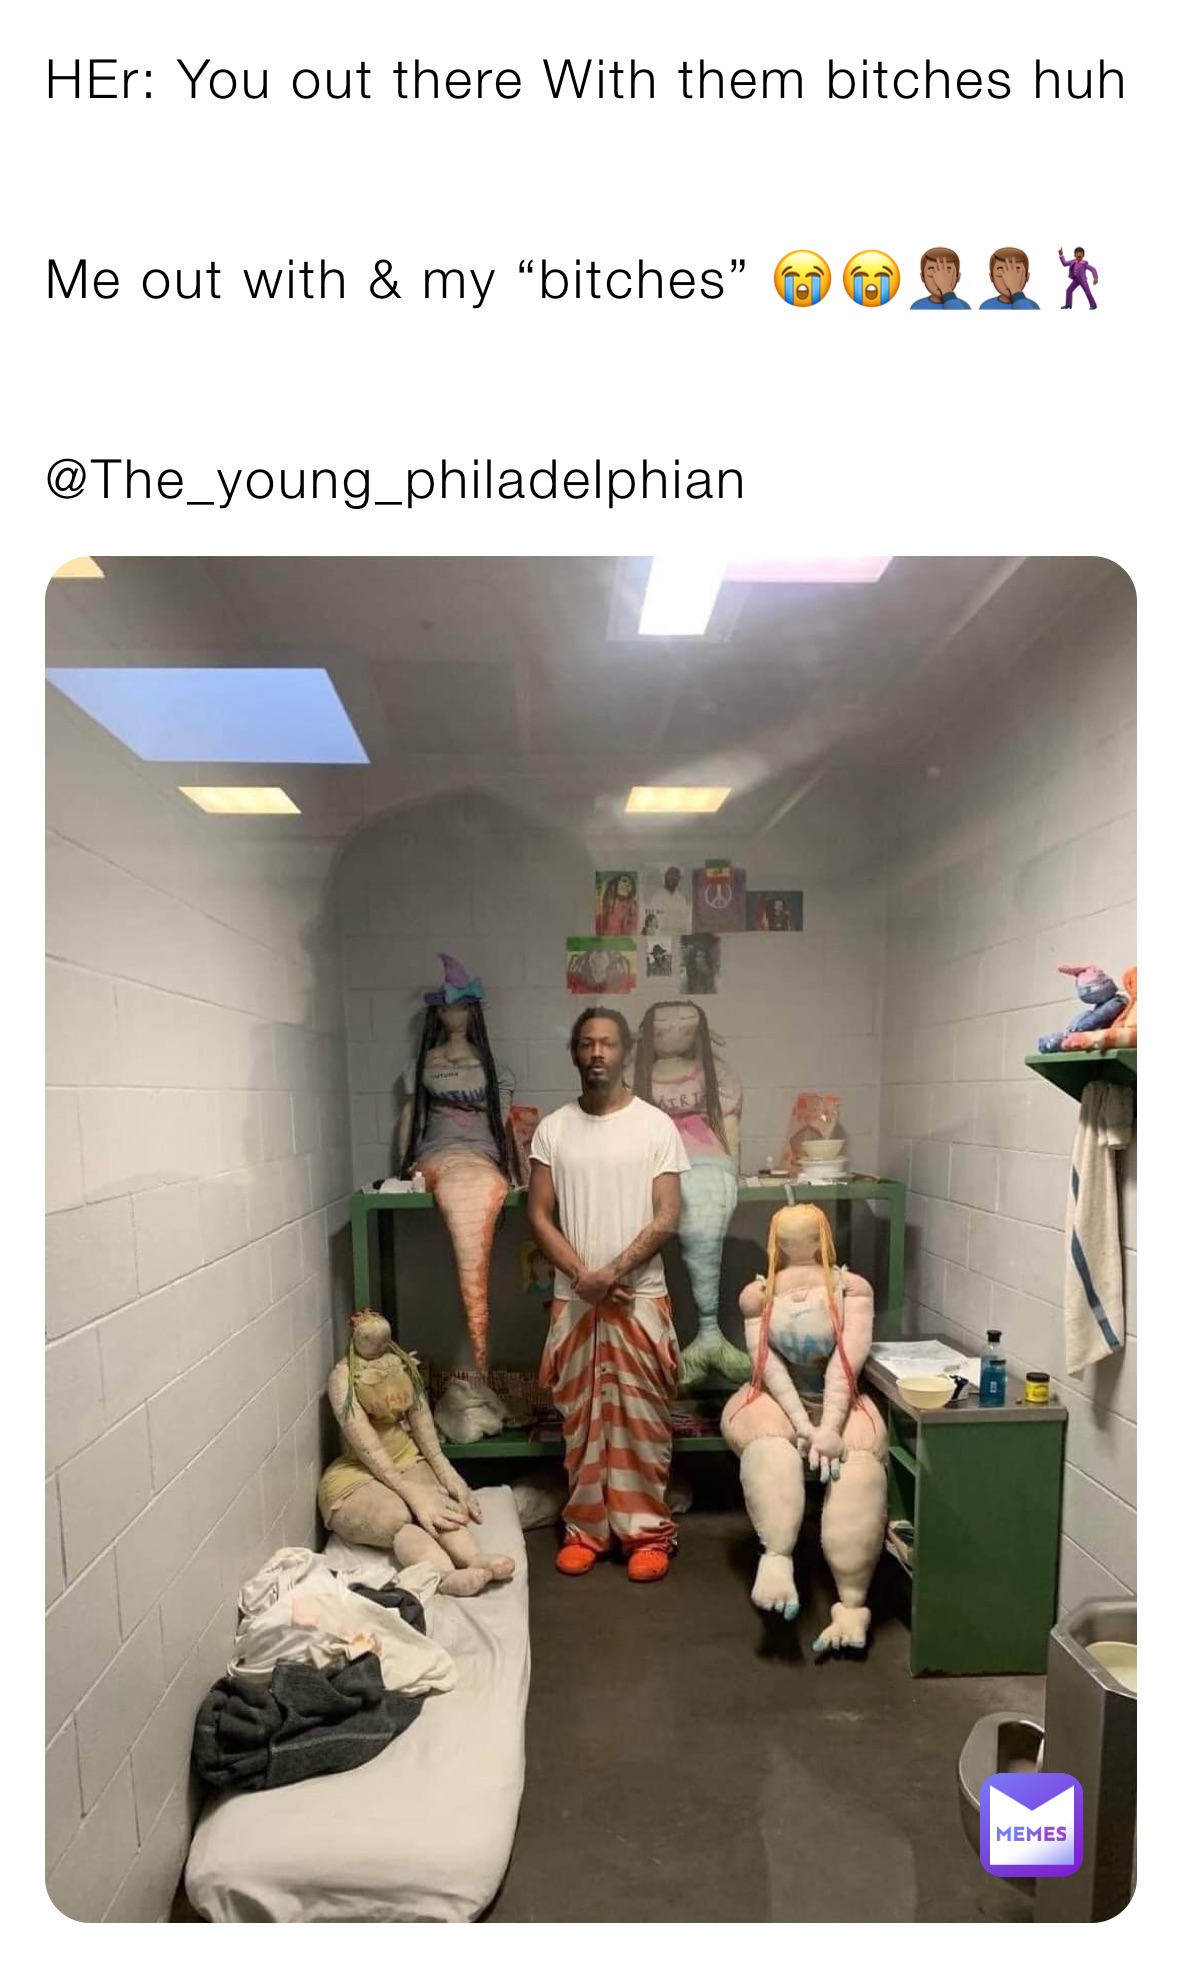 HEr: You out there With them bitches huh


Me out with & my “bitches” 😭😭🤦🏽‍♂️🤦🏽‍♂️🕺🏾


@The_young_philadelphian